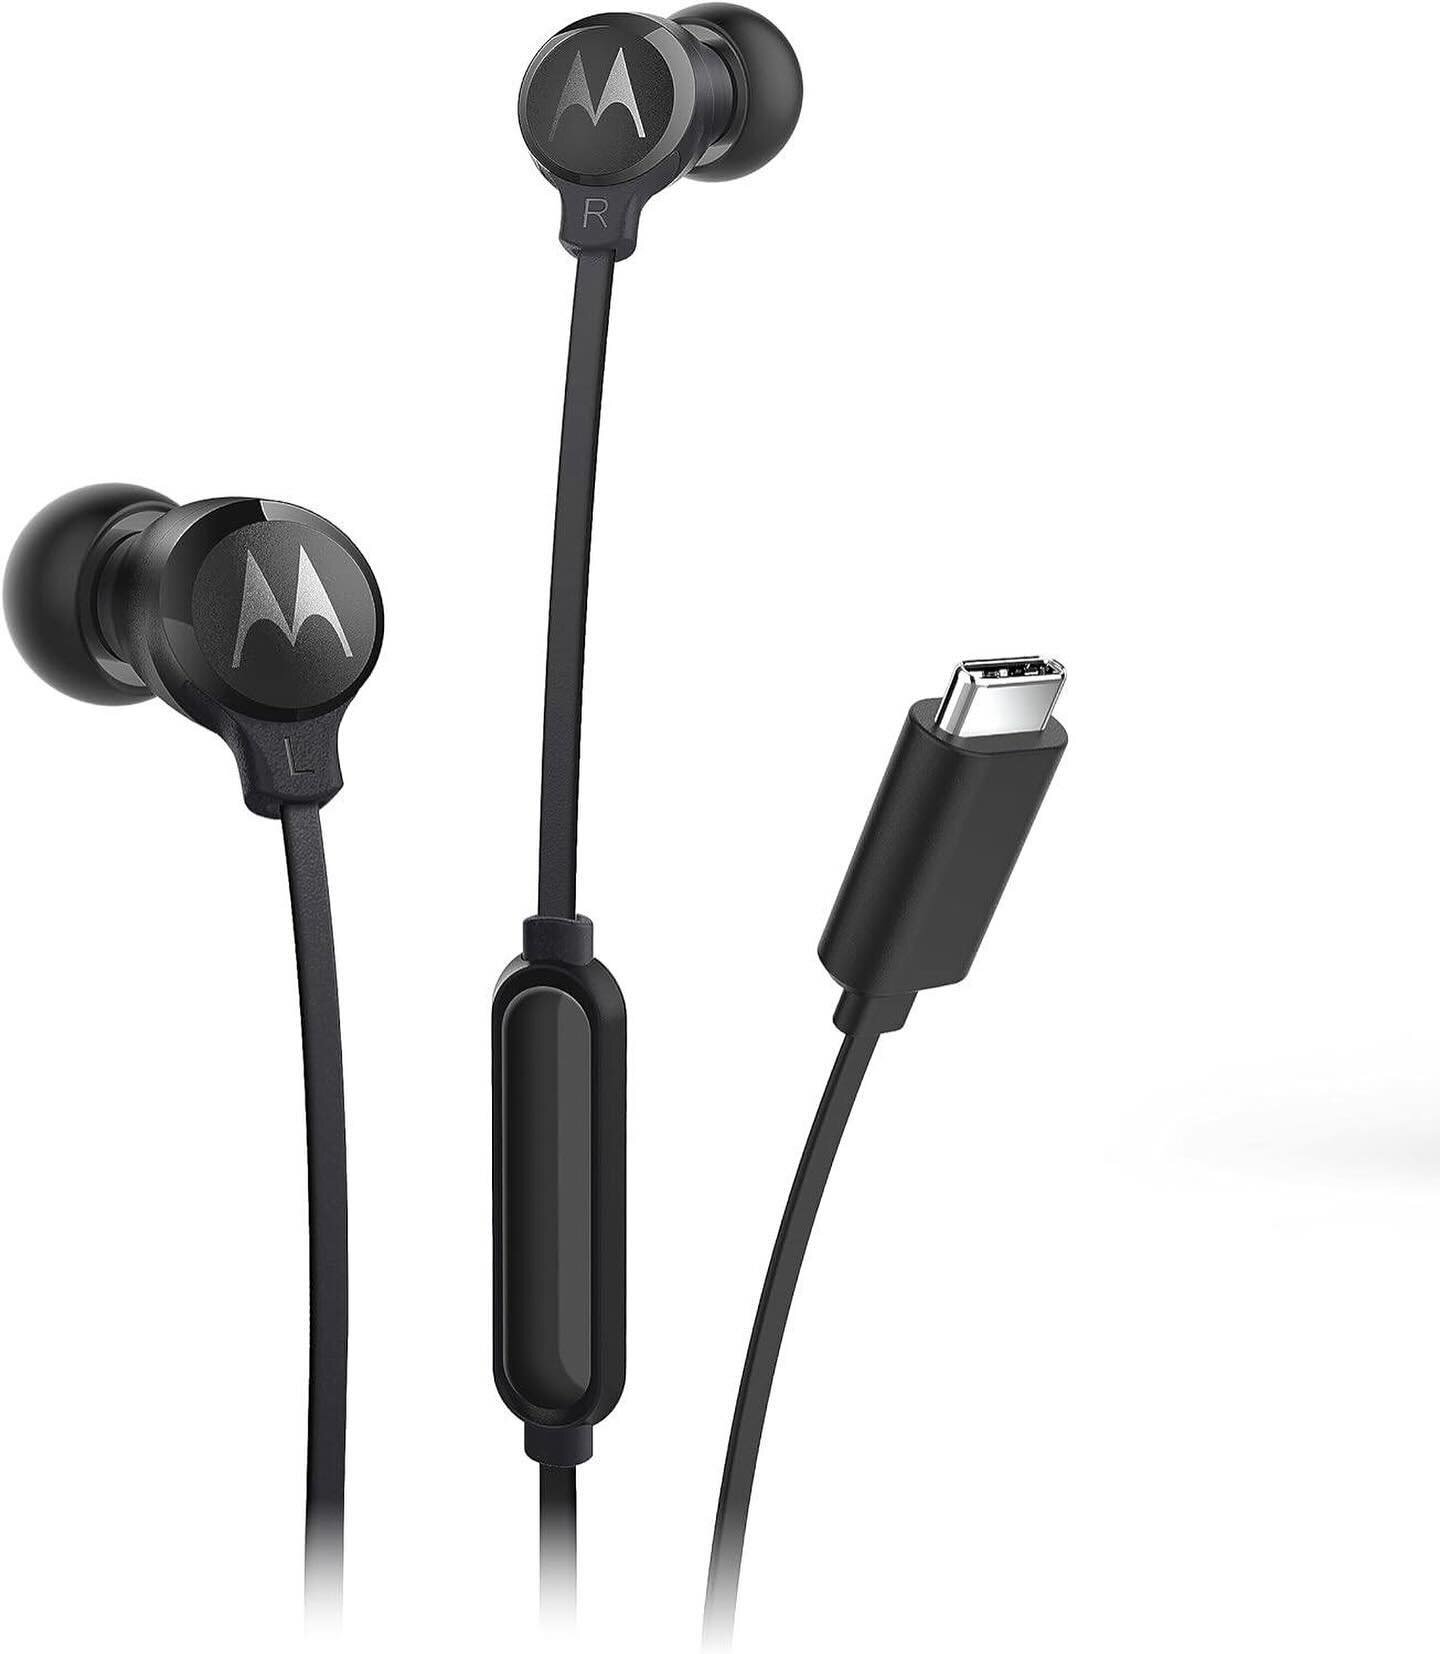 WHOLESALE ONLY

Motorola Earbuds 3C-S in White &amp; Black 

COMPATIBLE WITH IPHONE 15 SERIES (USB-C)

https://icont.ac/4WIUV 

- #motoearbuds #moto #motorola #earbuds #earpods #3cs #iphone15 #usbc #typec #iphone15plus #iphone15pro #iphone15promax #a